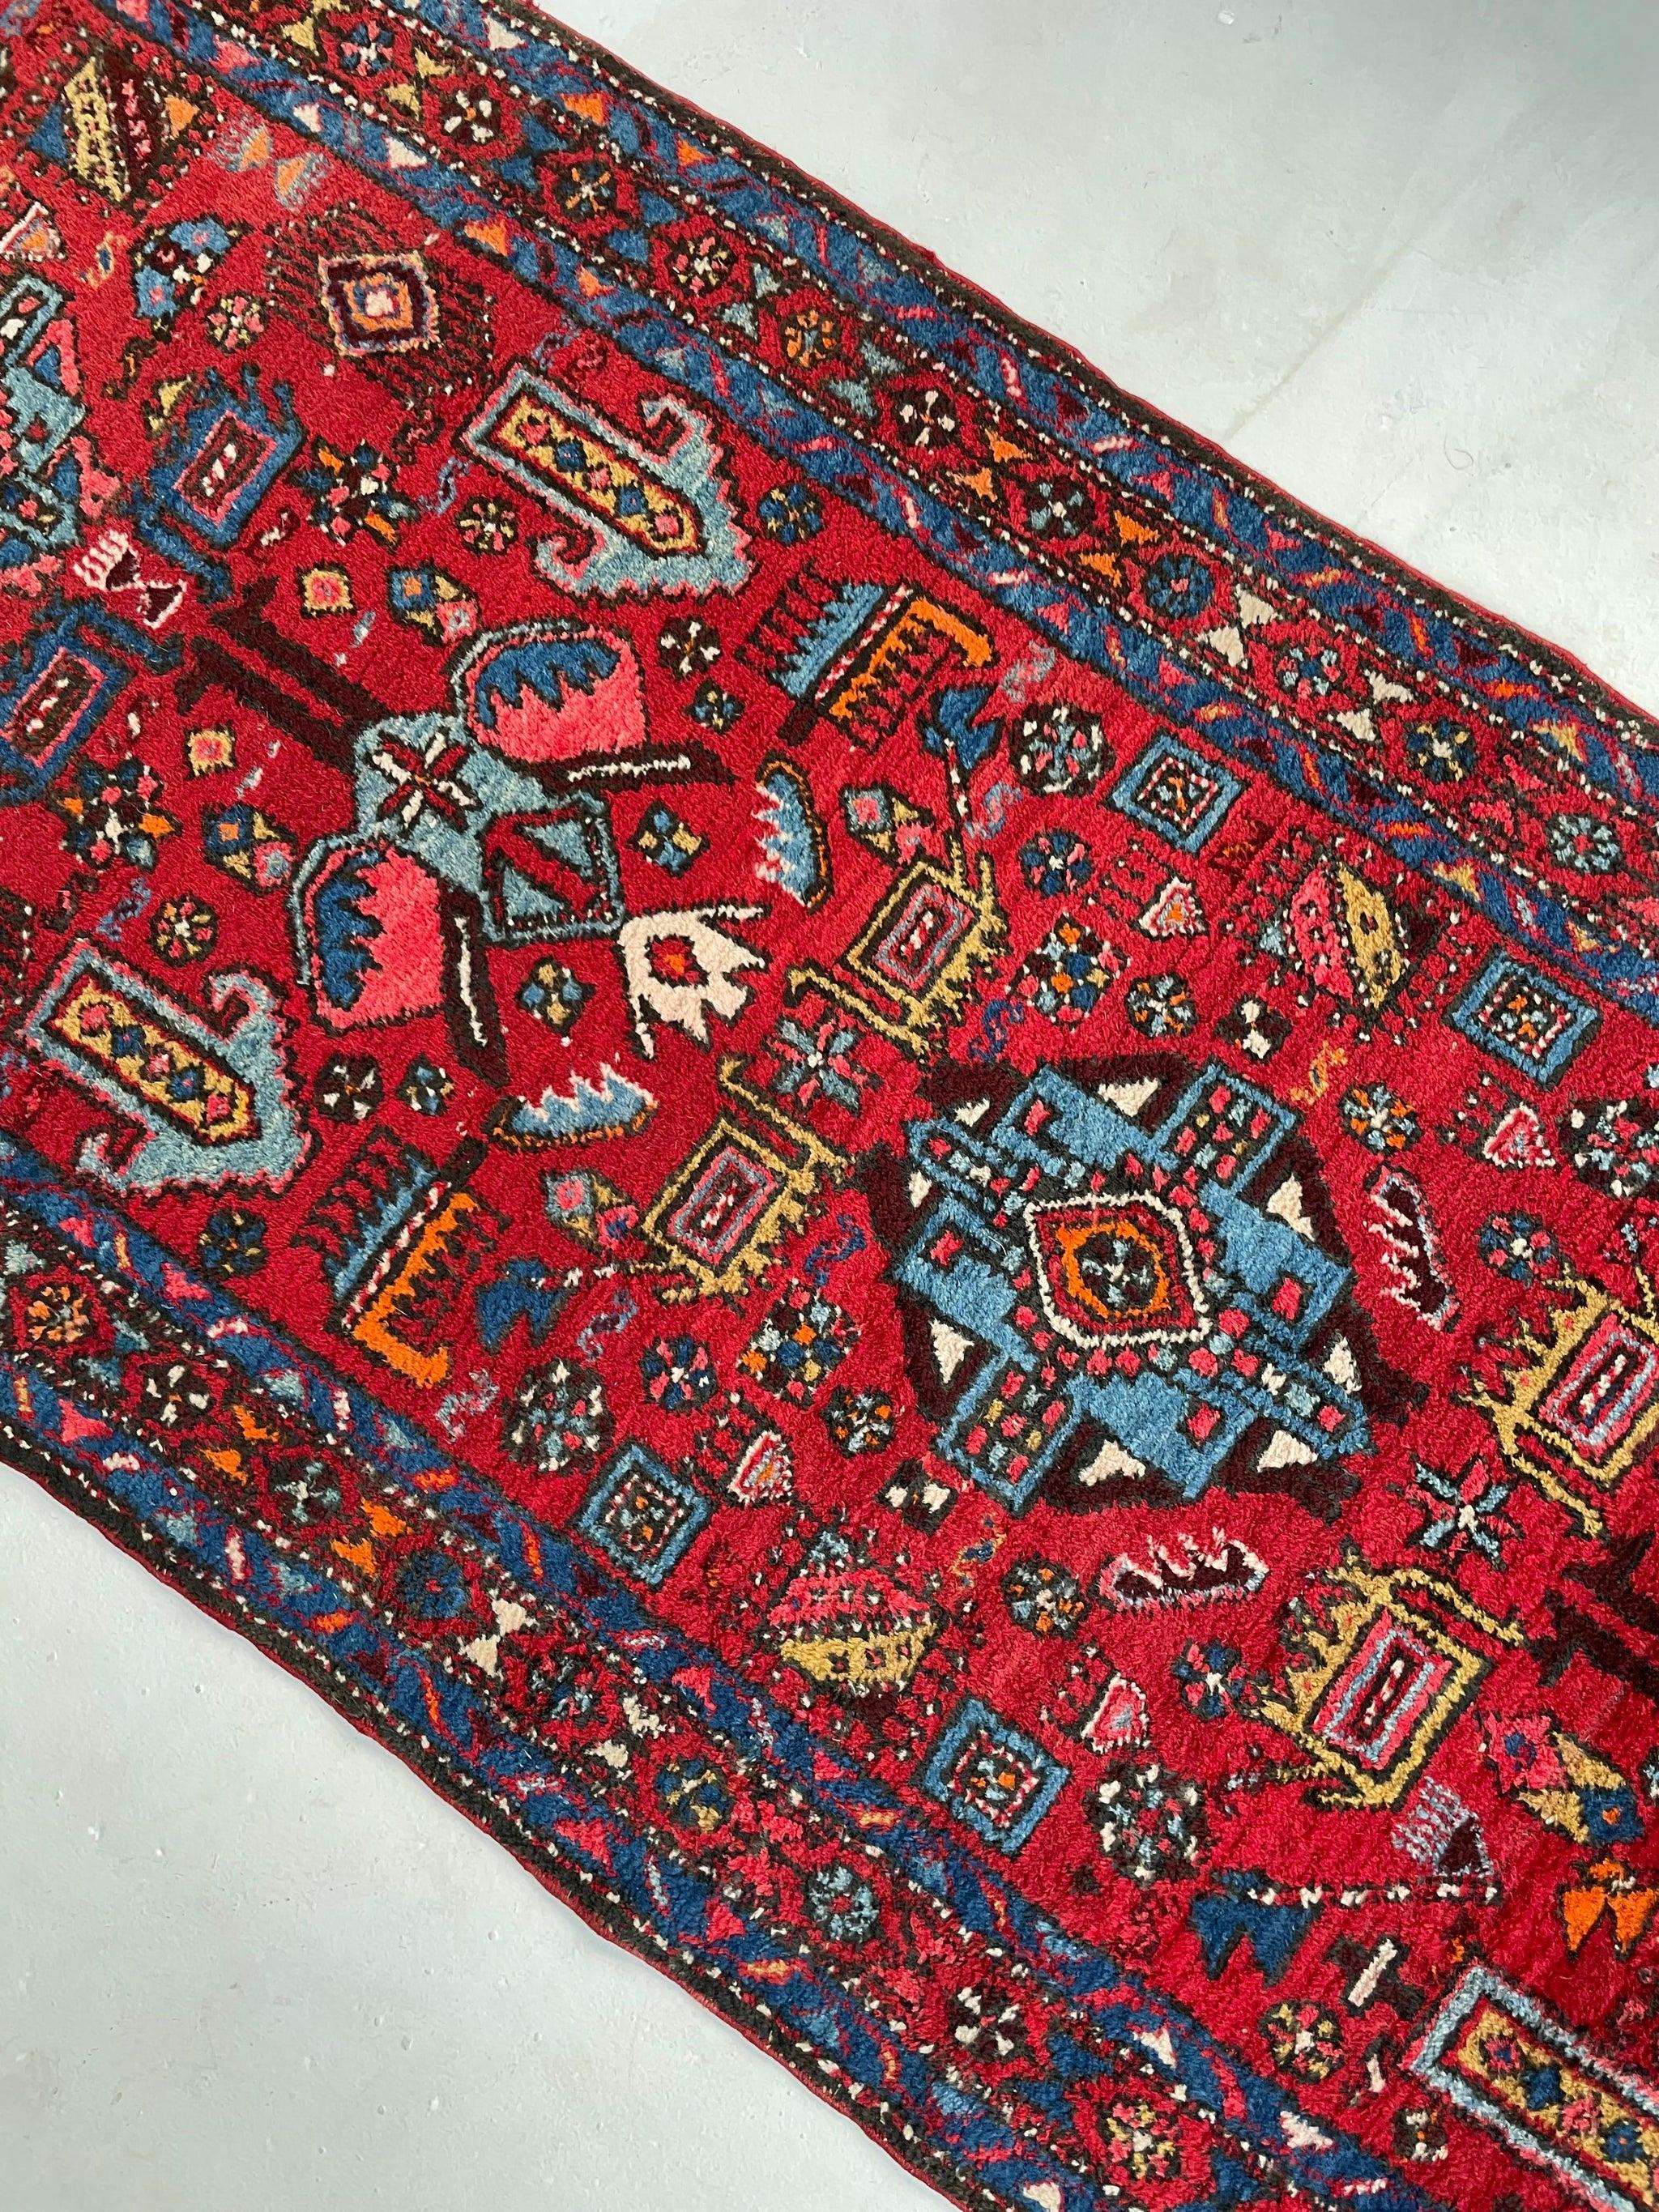 Unbelievably charming vintage Tribal Runner with Nomadic Motifs & Gorgeous colors 

About: One of the most charming, playful, and joyous runners we've ever had! So many happy colors fill up the wonderful camels, sheep, birds, and other animals